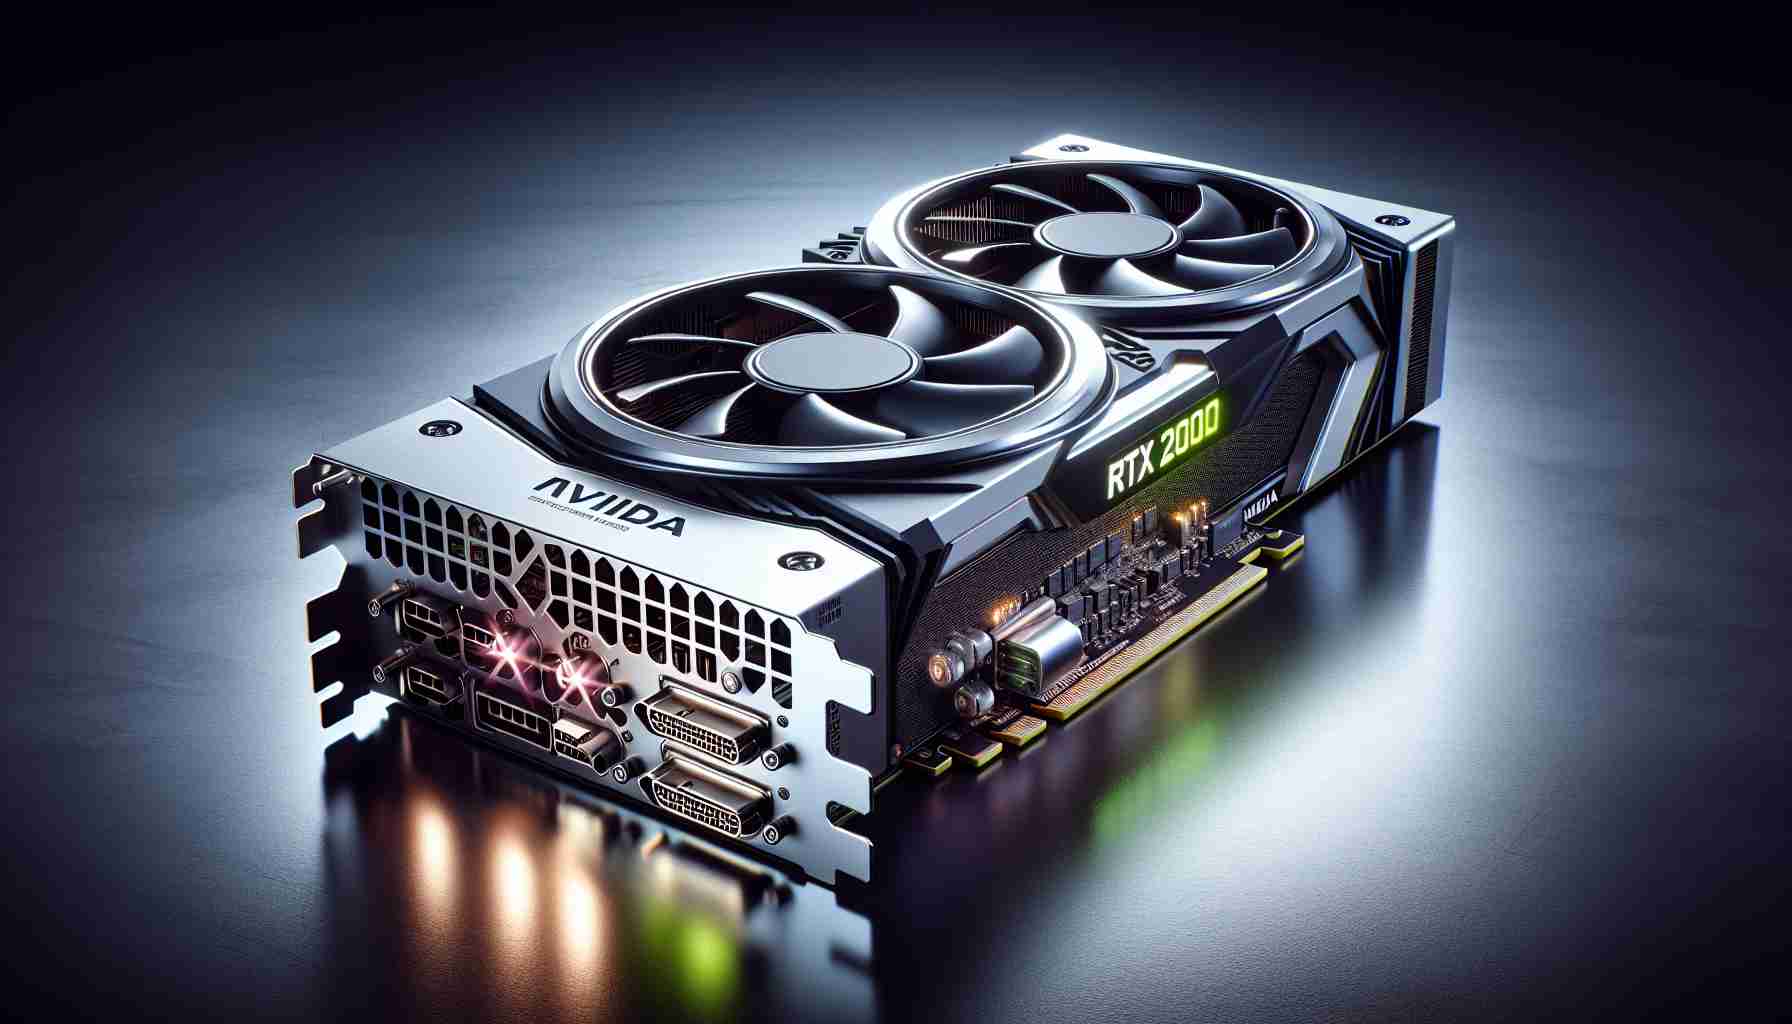 NVIDIA Introduces the RTX 2000 Ada: Revolutionary GPU for Entry-Level Workstations